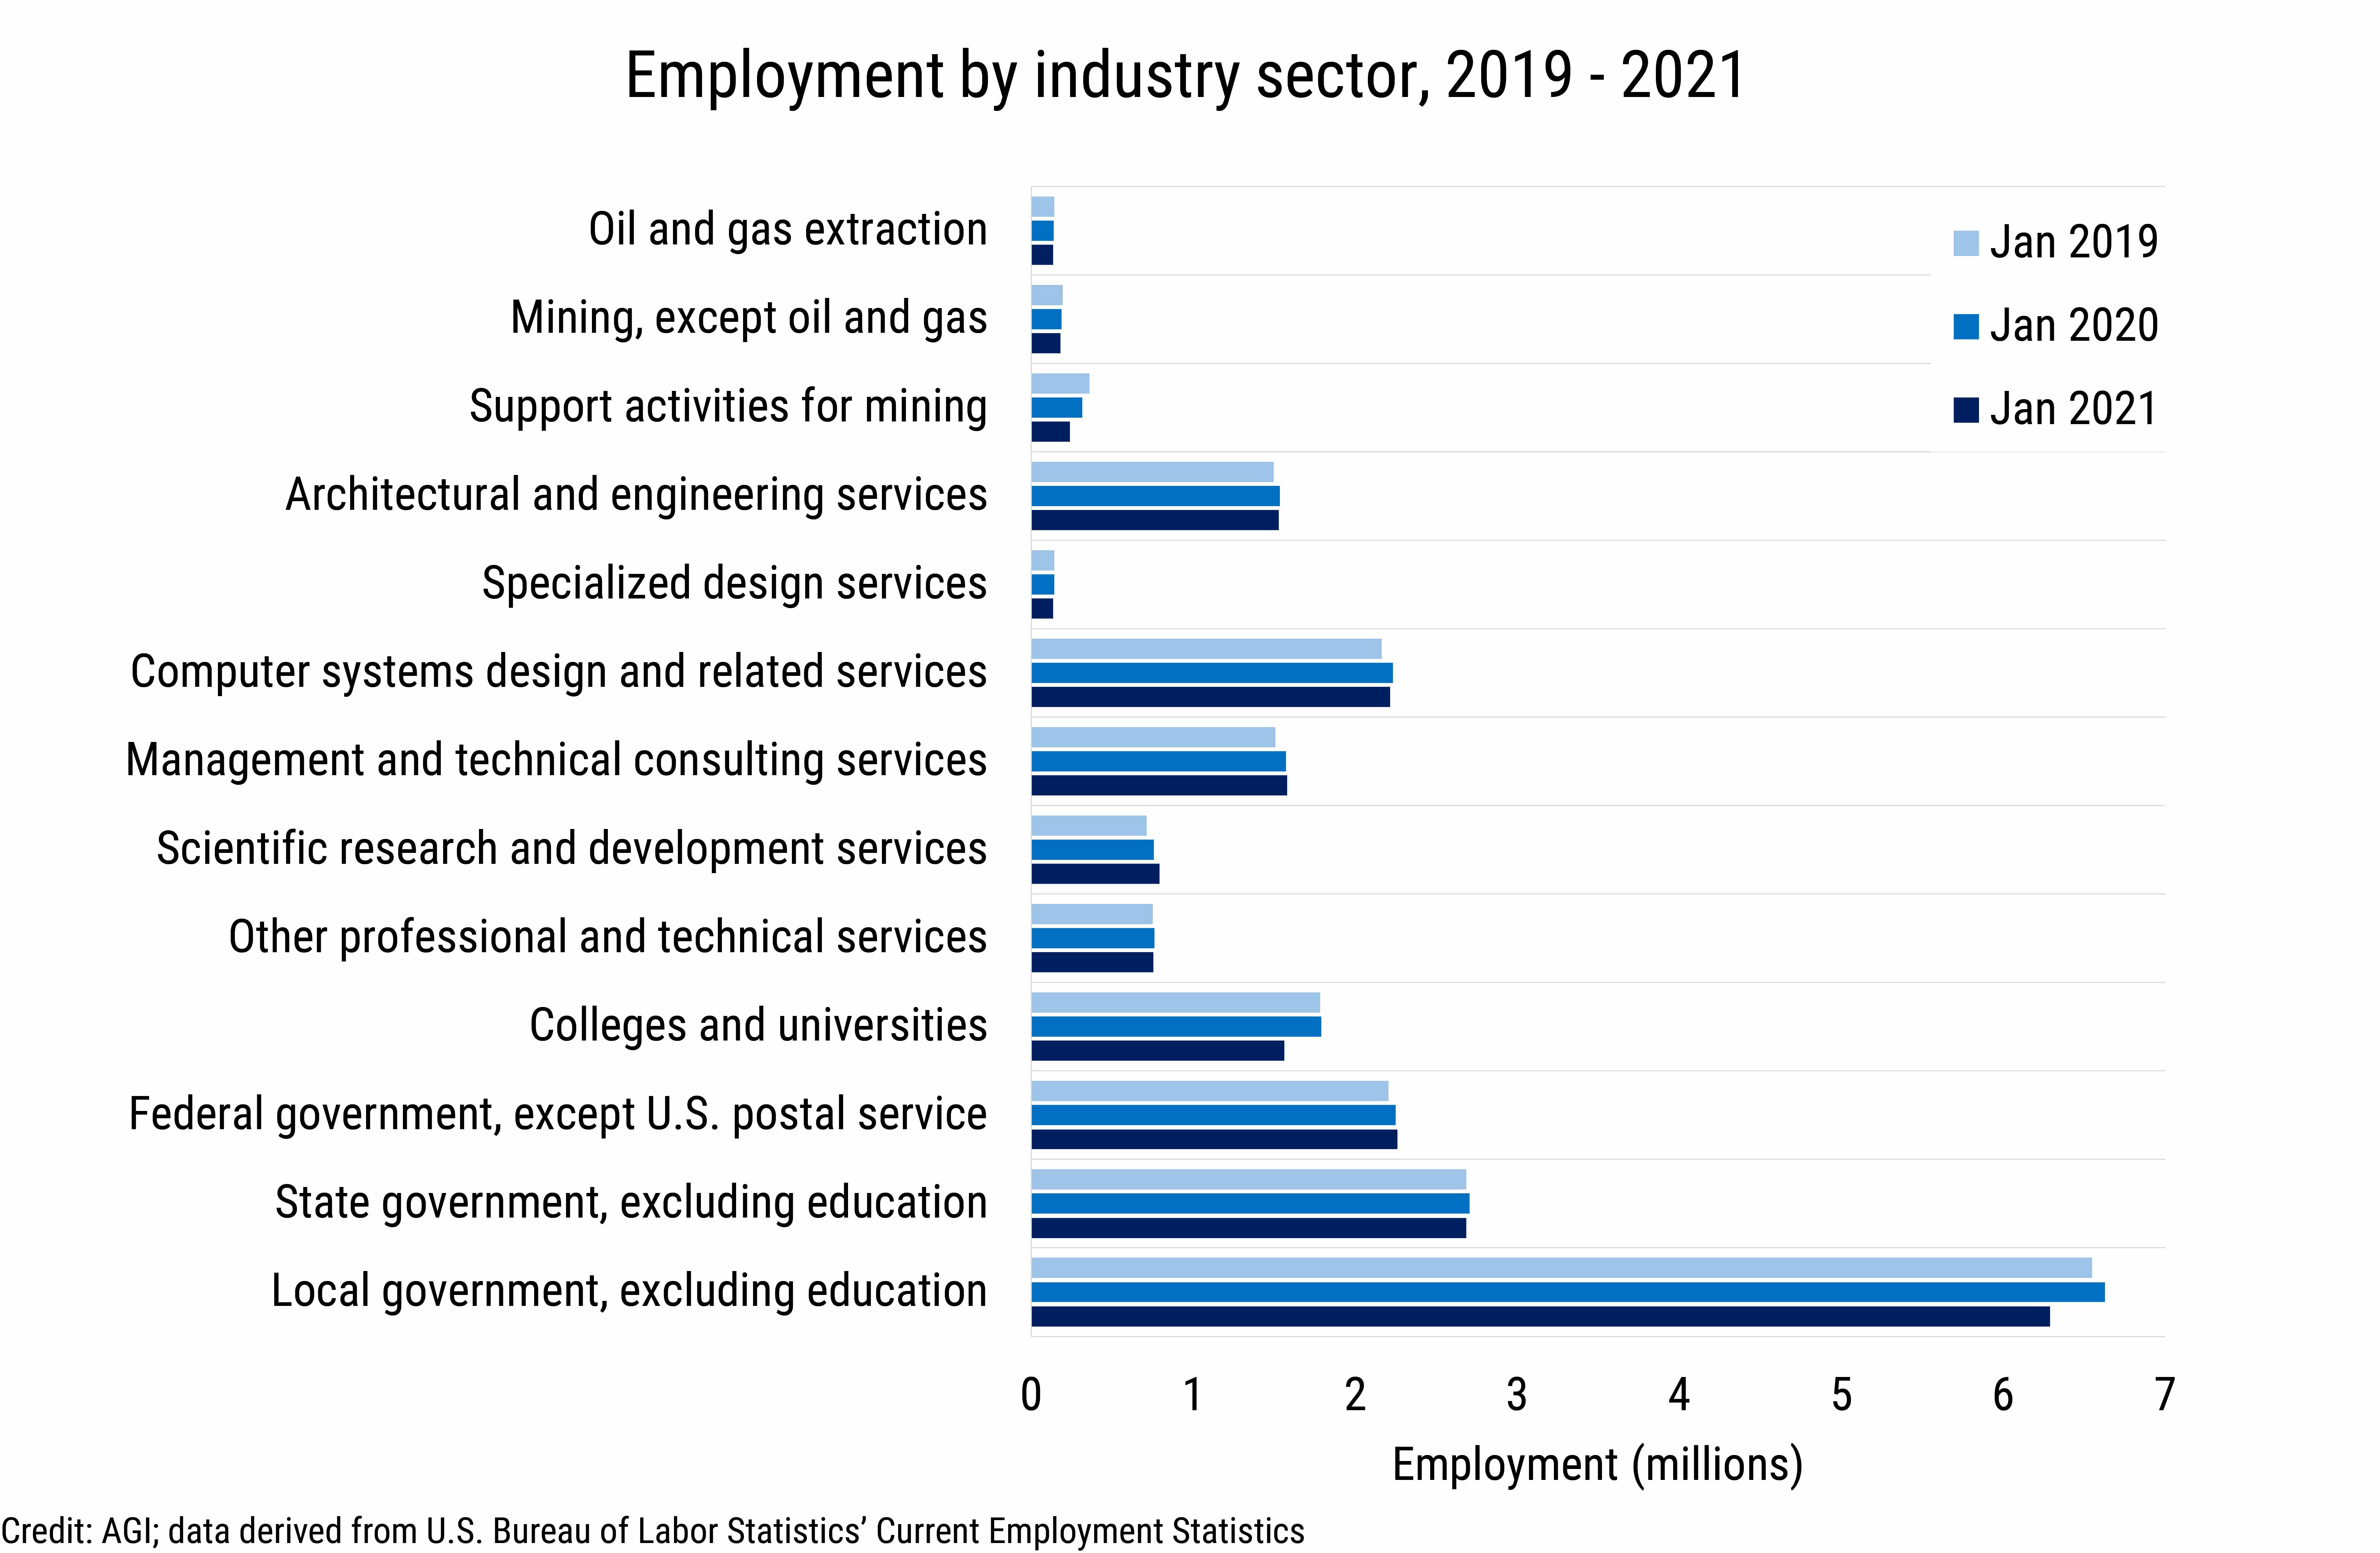 DB_2021-010 chart 03: Employment by industry sector, 2019 - 2021 (Credit: AGI, data derived from the U.S. Bureau of Labor Statistics, Current Employment Statistics)